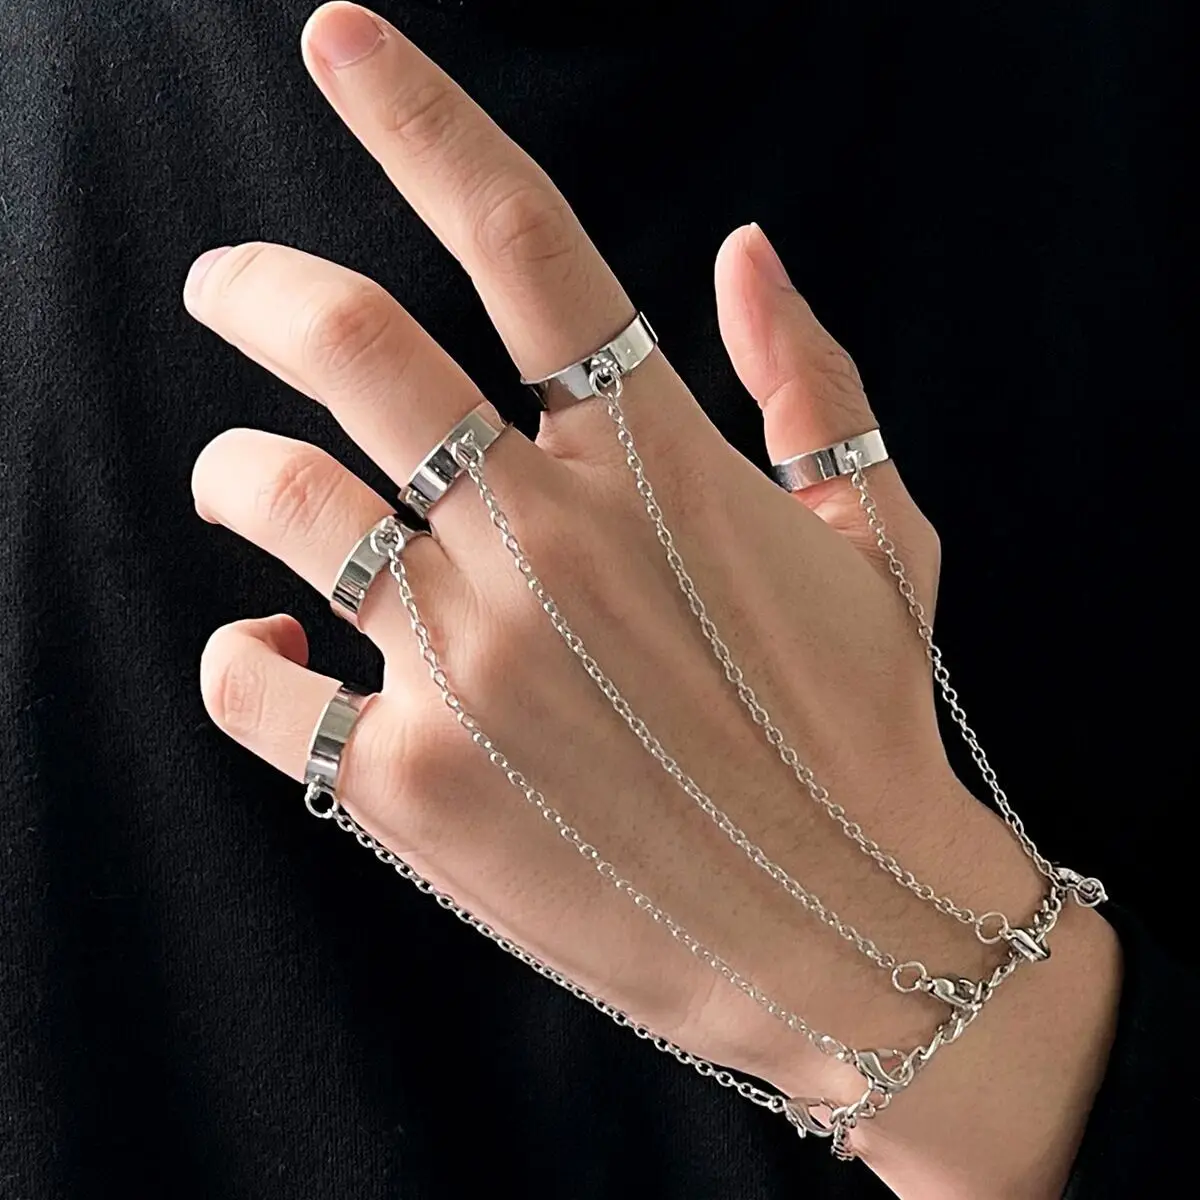 Punk Silver Color Ring Set Wrist Bracelet for Women Men Fashion Hip-pop Ring Charm Jewelry Accessories Gift Layered Chains Rings